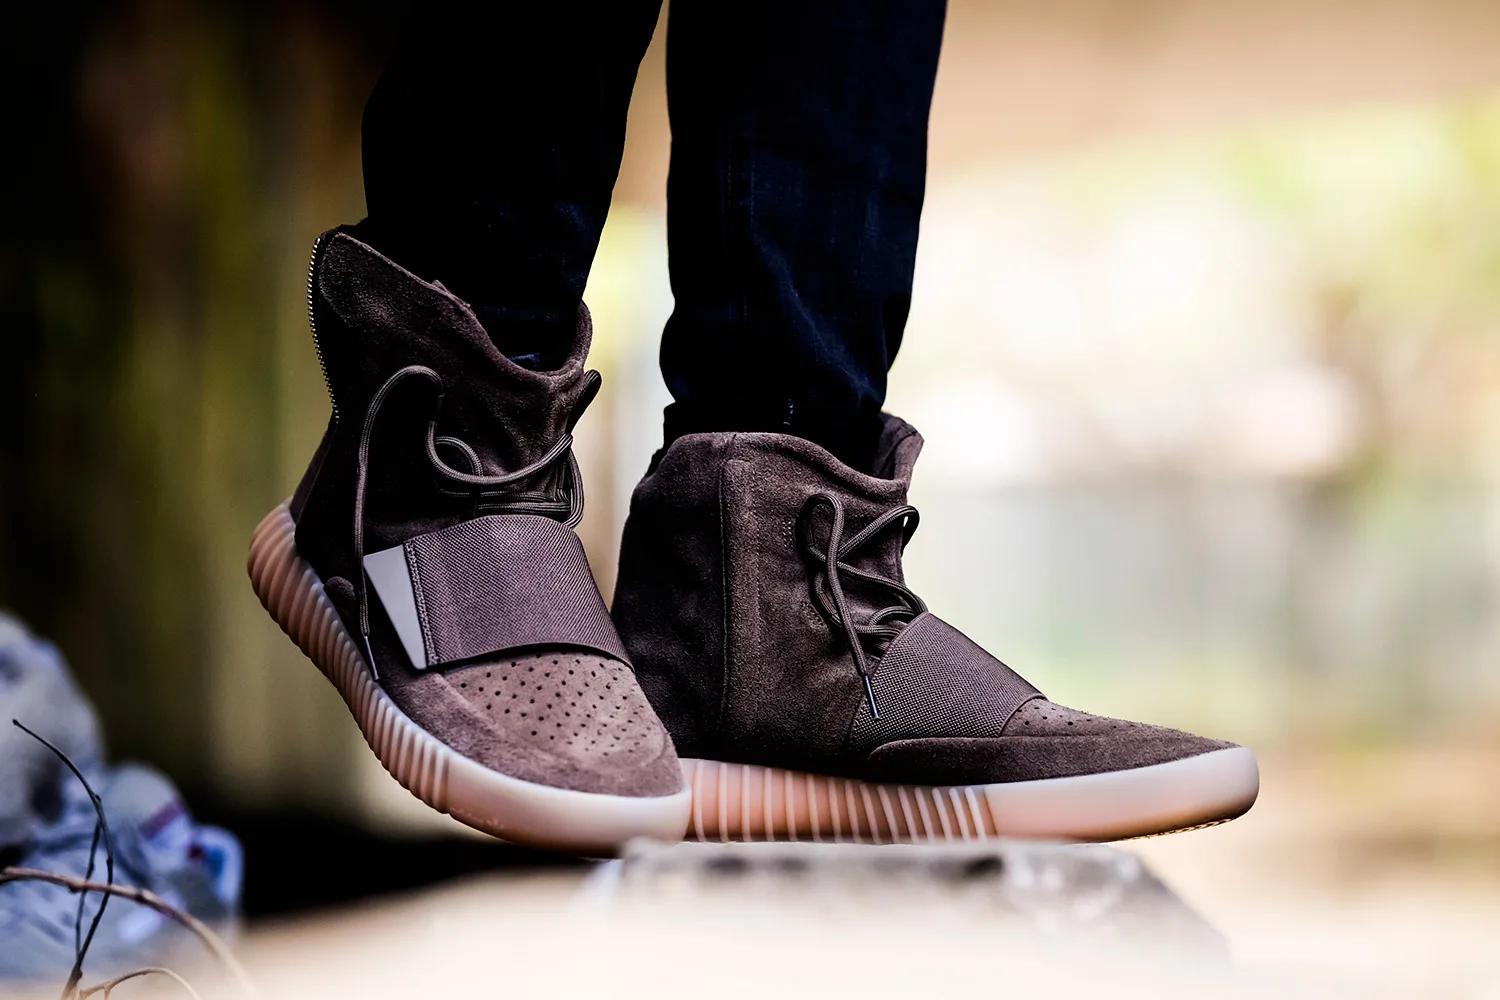 On foot look at the Yeezy Boost 750 Light Brown - Fastsole